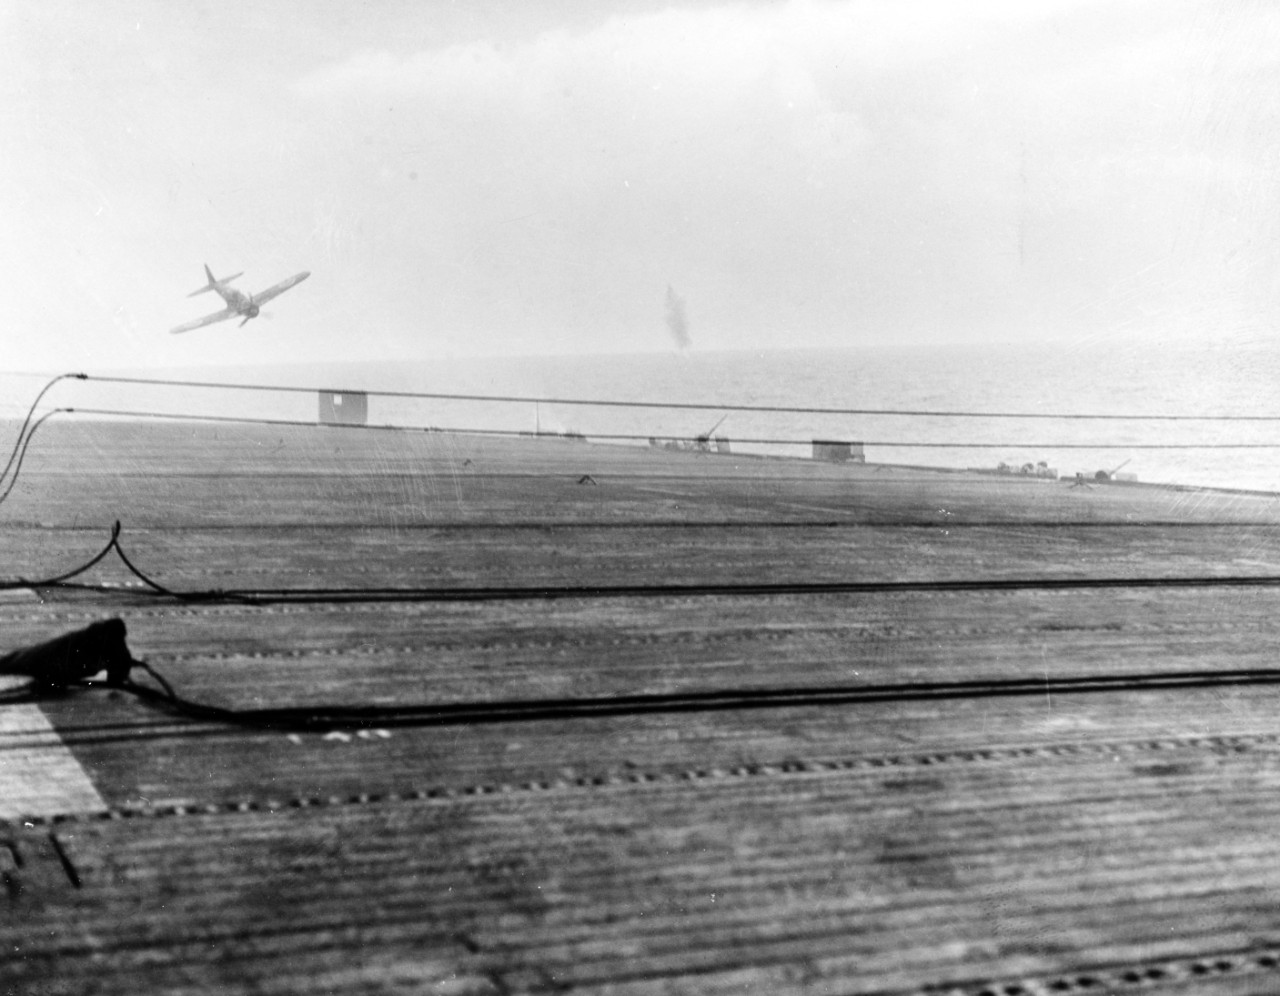 80-G-288882:  USS White Plains (CVE-66), October 25, 1944.  Battle of Leyte Gulf, Battle off Samar.  Japanese “Zeke” fighter attempting a kamikaze attack on USS White Plains (CVE-66) off Samar.  Note, the plane crashed just off the ship’s port side.  Official U.S. Navy Photograph, now in the collections of the National Archives.  